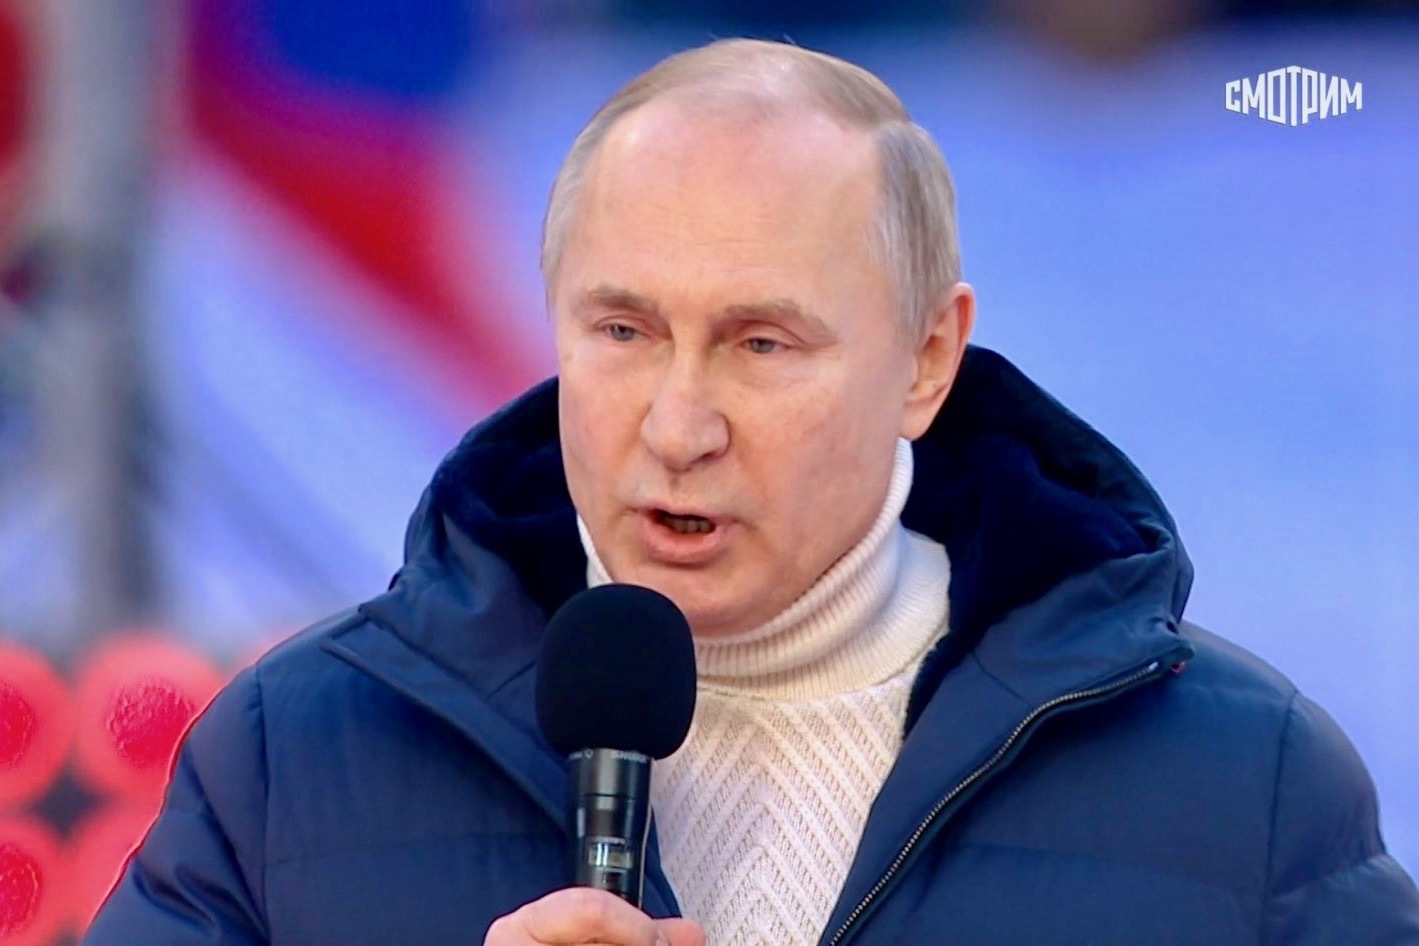 Vladimir Putin Suddenly Disappears From TV Broadcast During Russia Speech